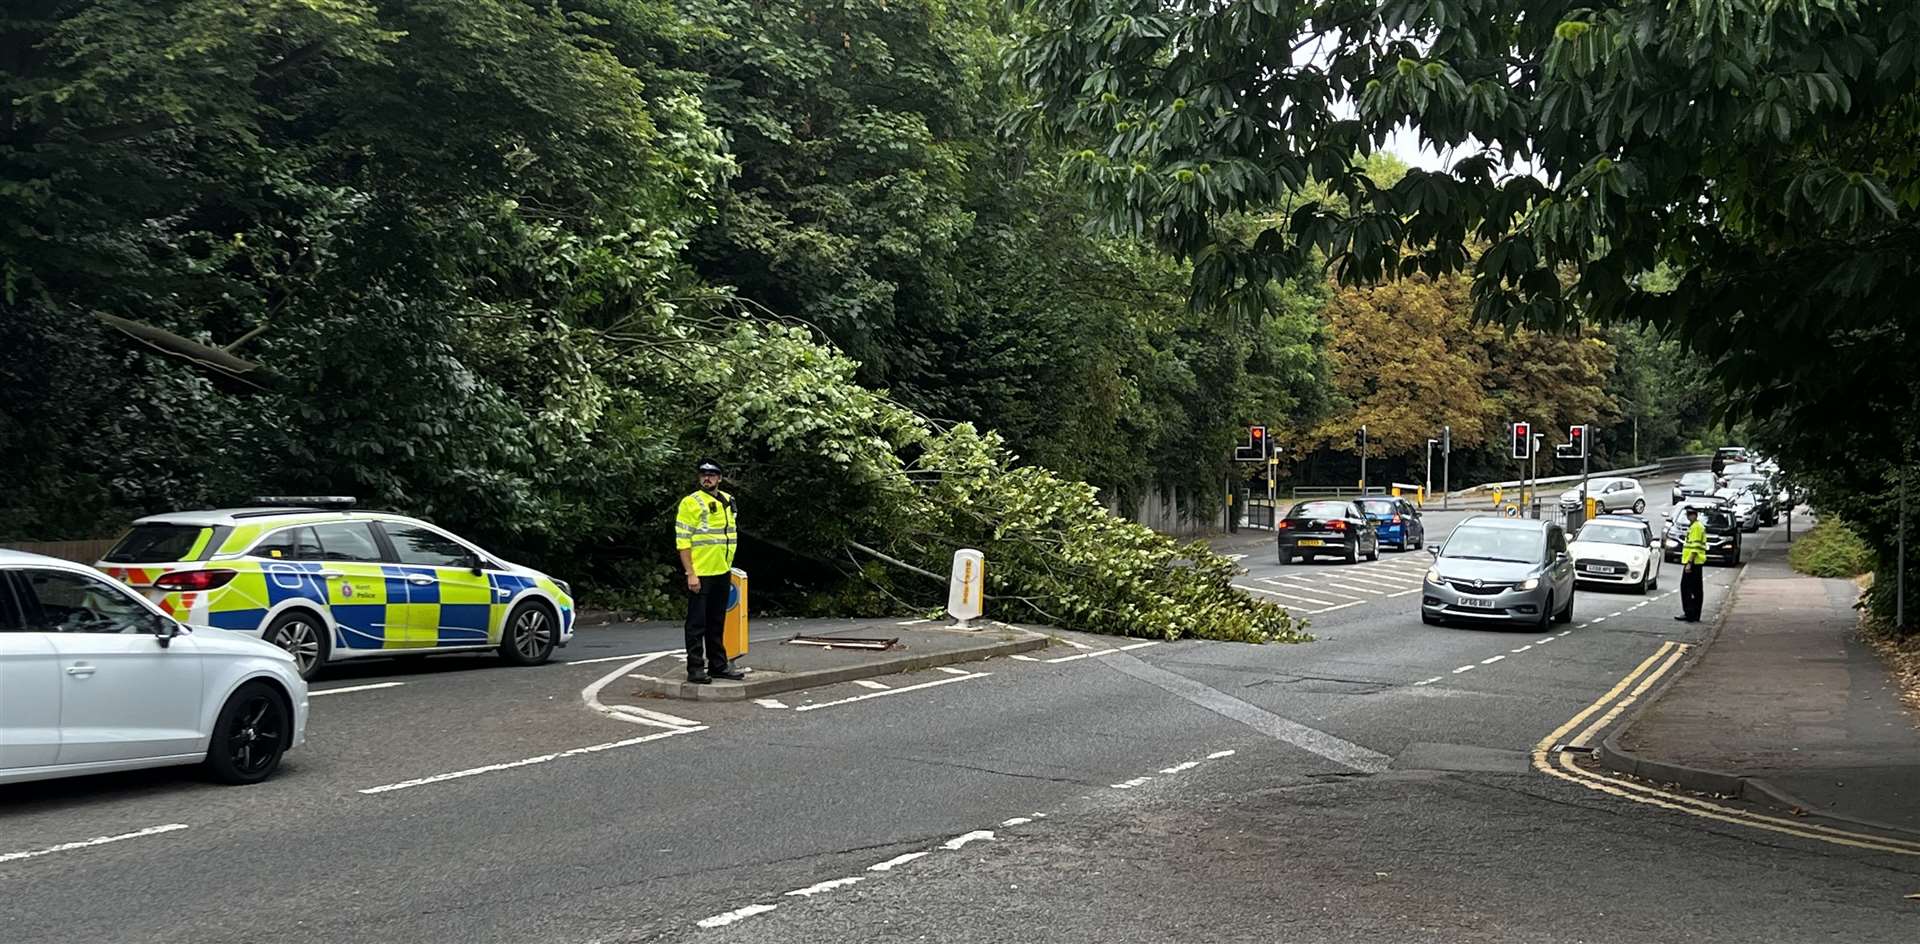 Police are diverting traffic around the tree. Picture: Steve Salter